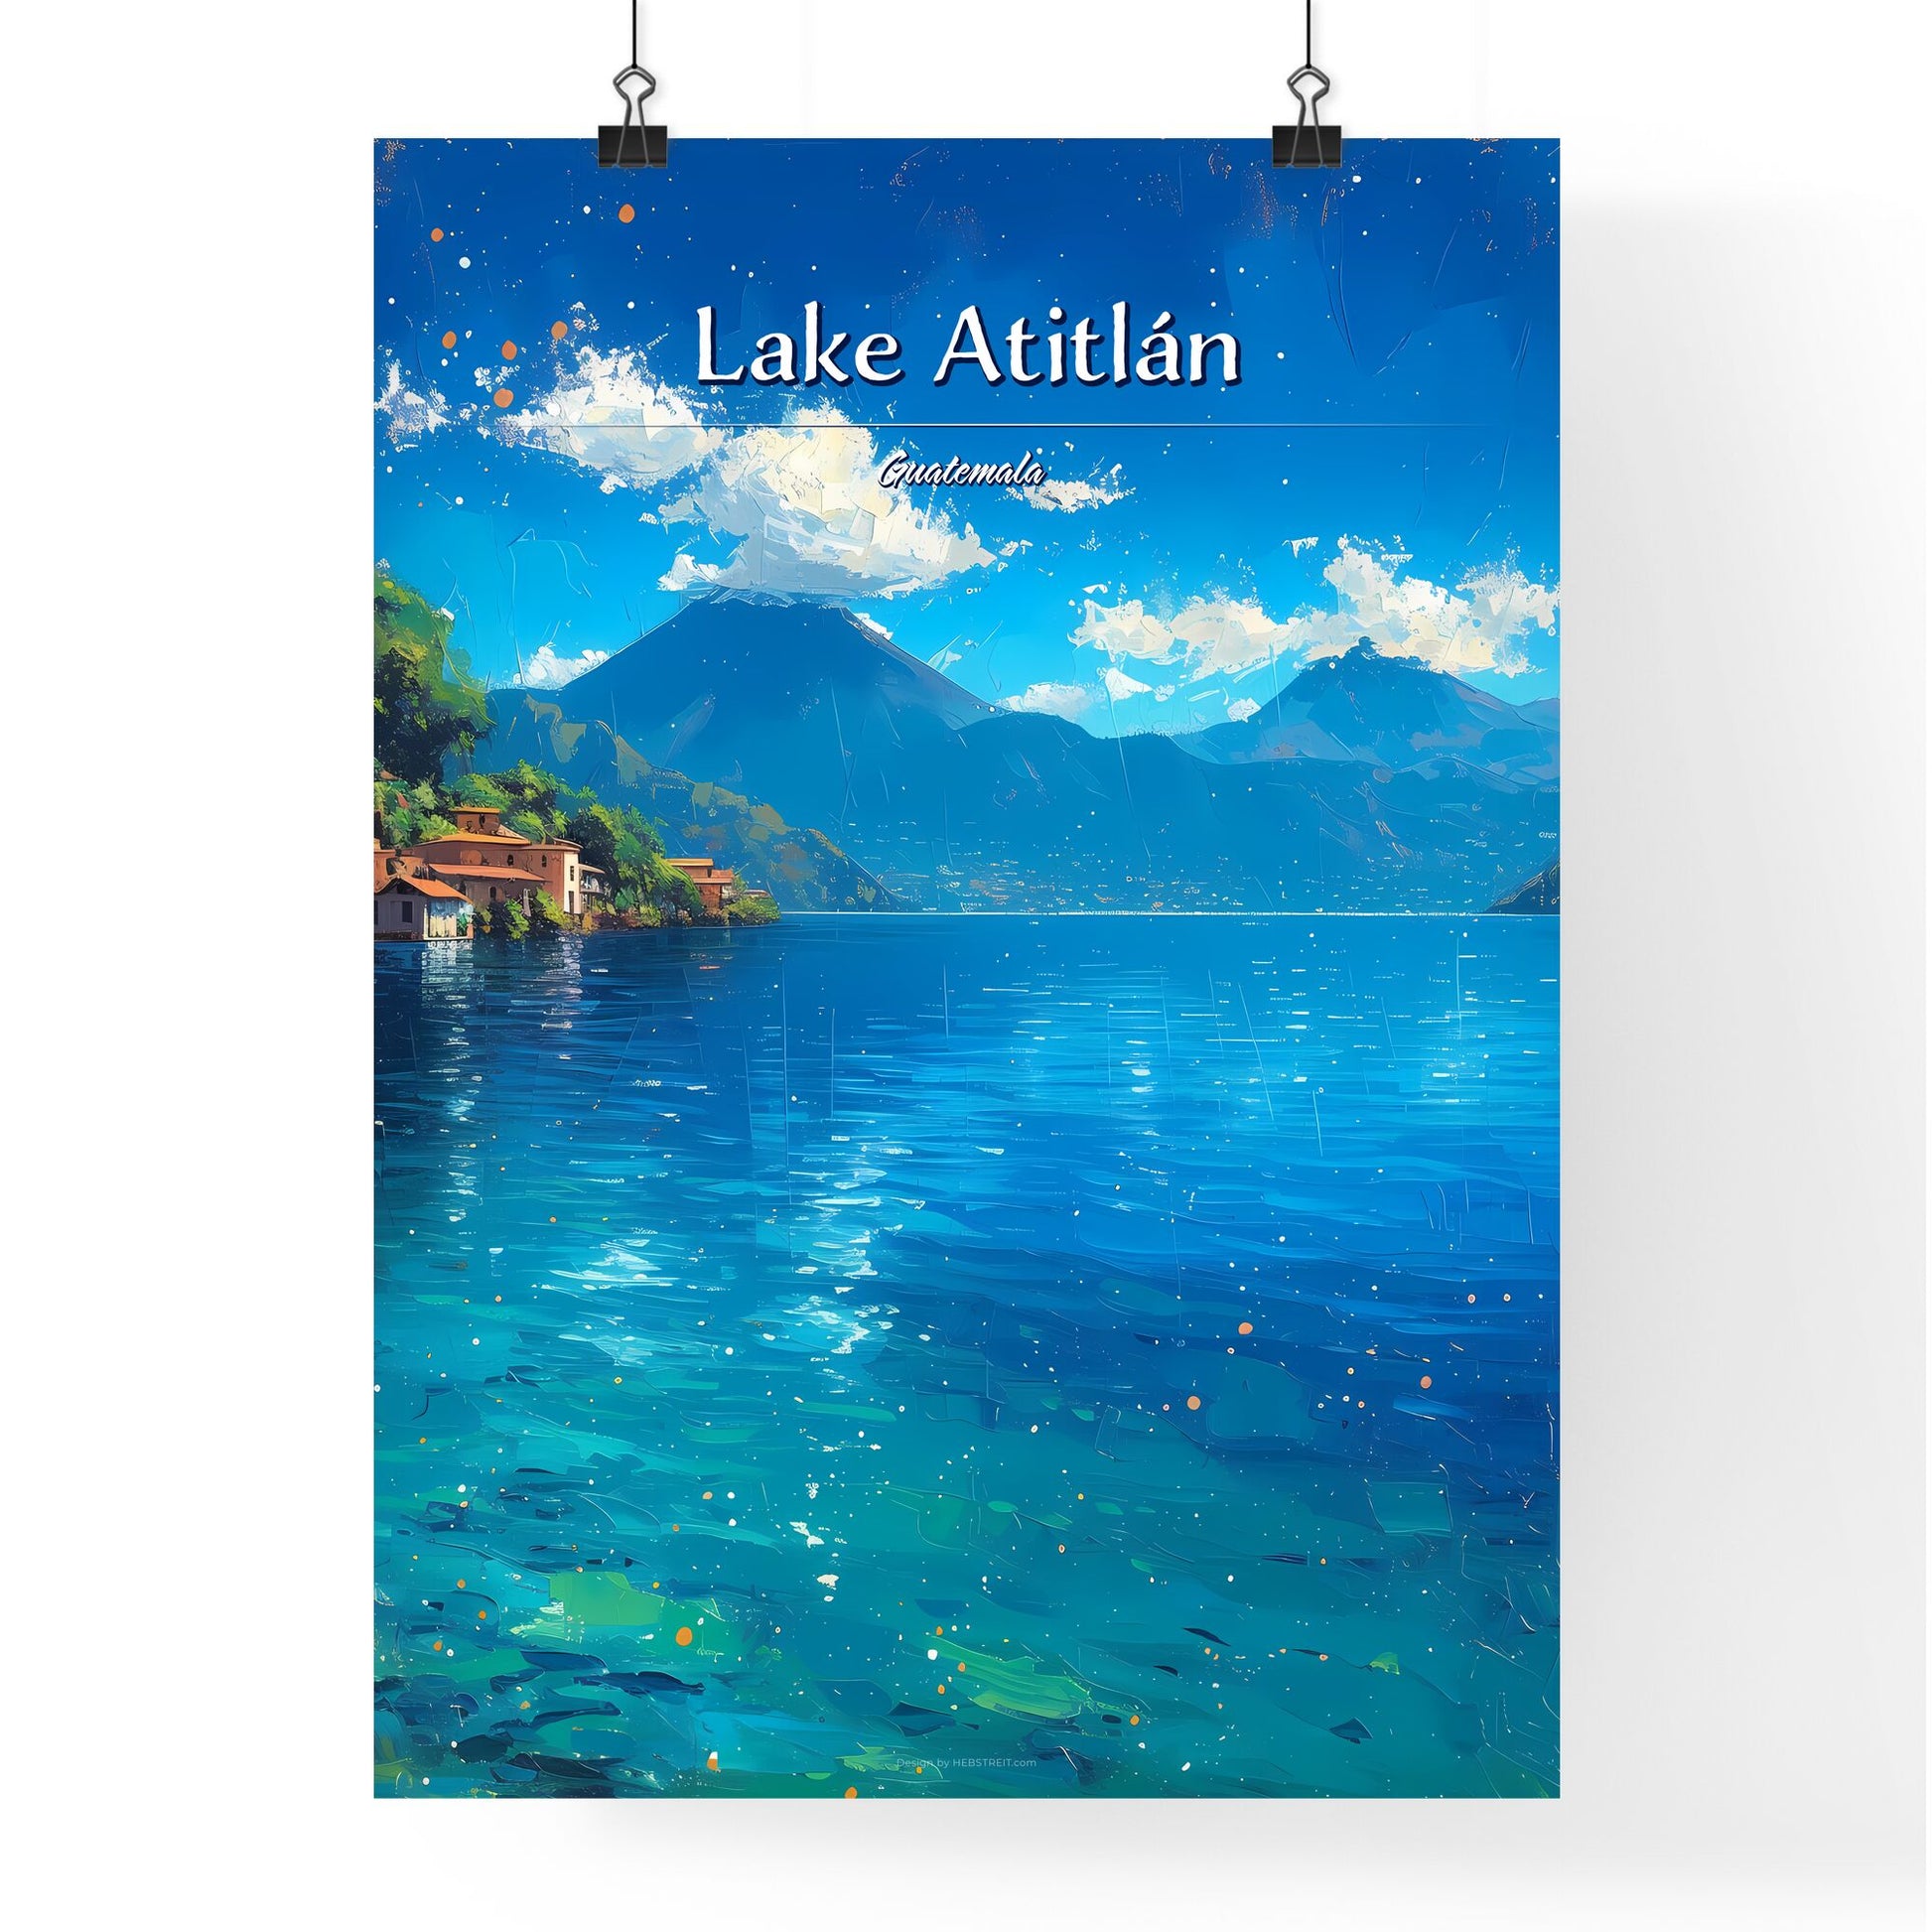 Lake Atitlán, Guatemala - Art print of a lake with houses and mountains in the background Default Title